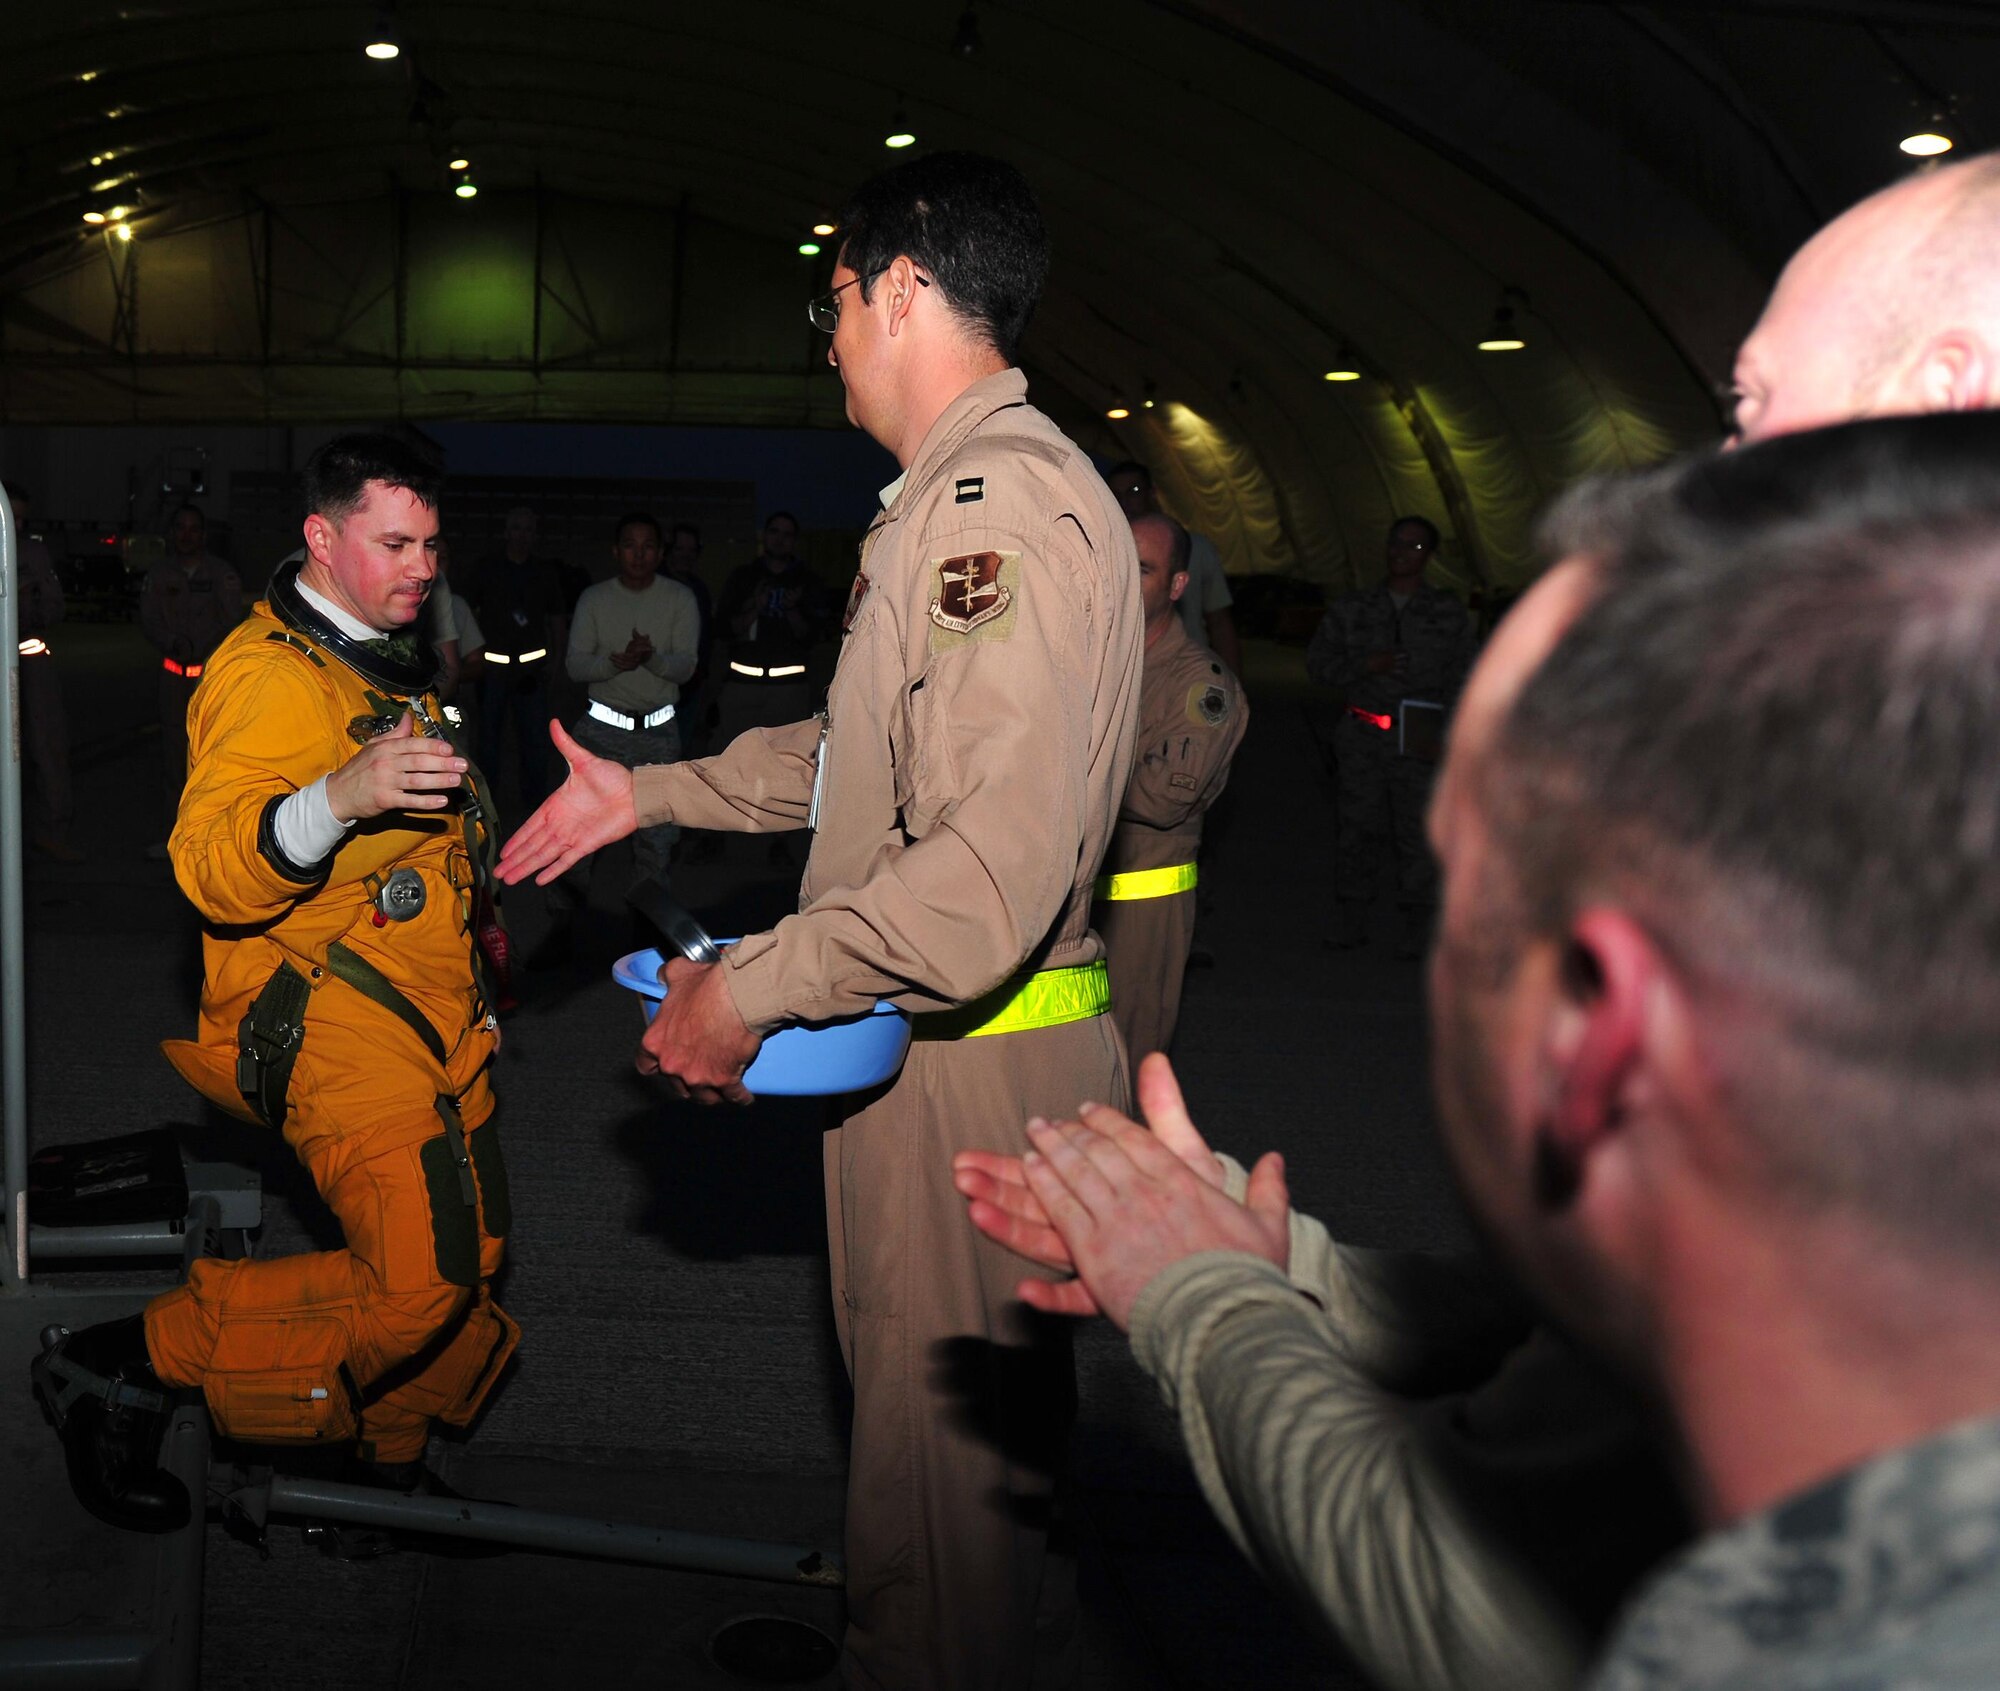 Capt. Stephen, 99th Expeditionary Reconnaissance Squadron operations officer and U-2 pilot, is welcomed back from a combat sortie by U-2 maintainers, physiological support technicians and fellow pilots at an undisclosed location in Southwest Asia, Dec. 7, 2015. At any one time there are hundreds of people supporting U-2 operations, from the maintainers on the ground to the intelligence personnel who analyze the information that is gathered and disseminated by U-2 pilots during combat sorties. (U.S. Air Force photo by Staff Sgt. Kentavist P. Brackin/released)